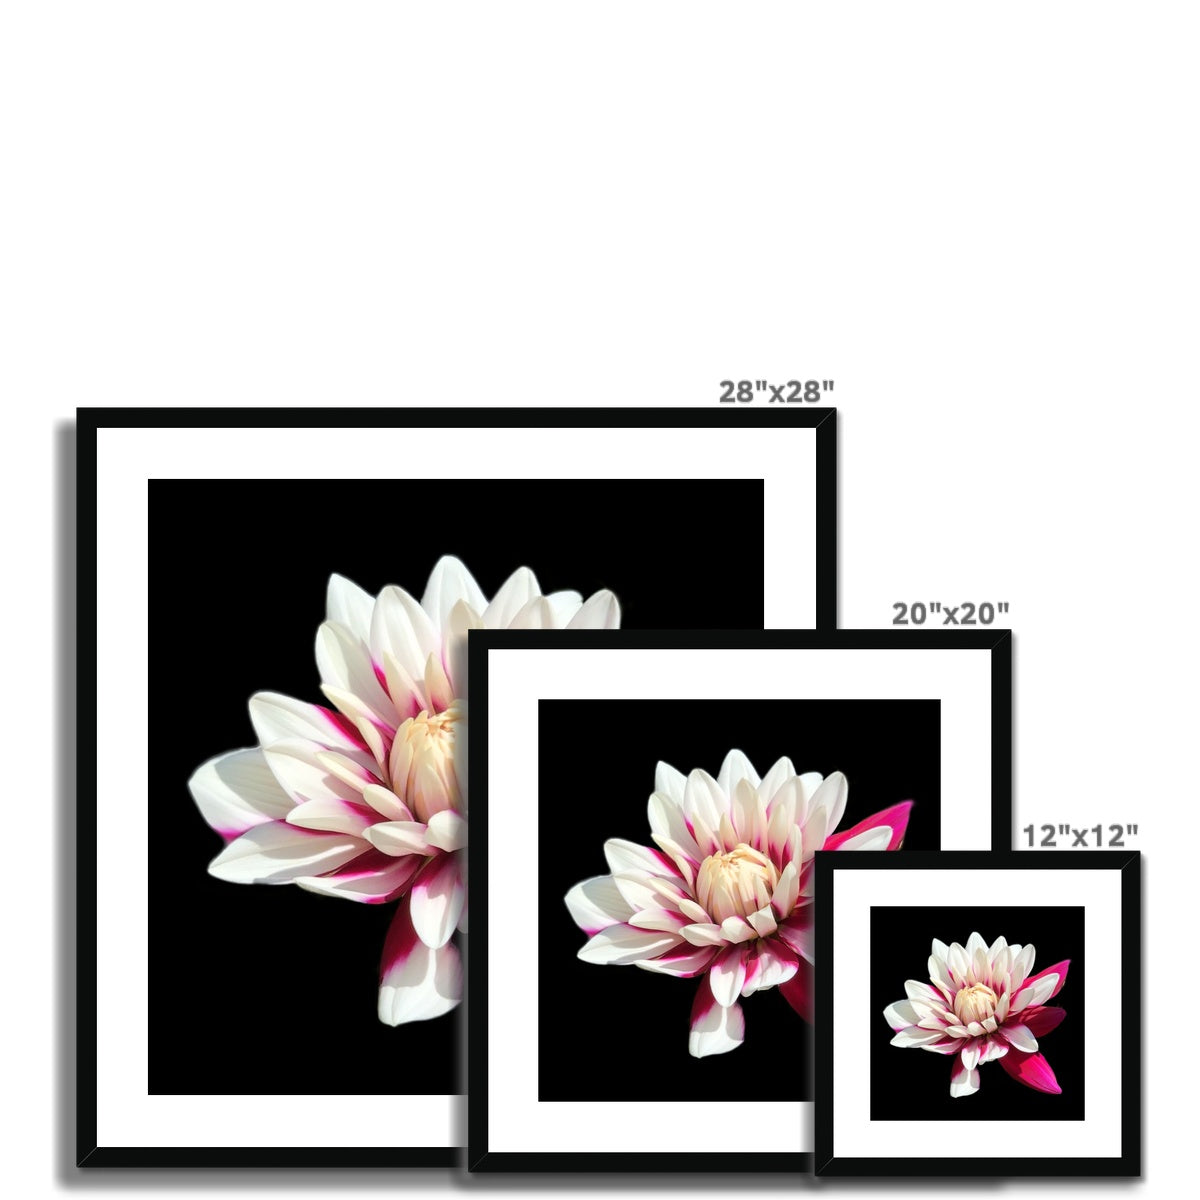 Pink Dahlia Print Framed & Mounted Print - Nature of Flowers